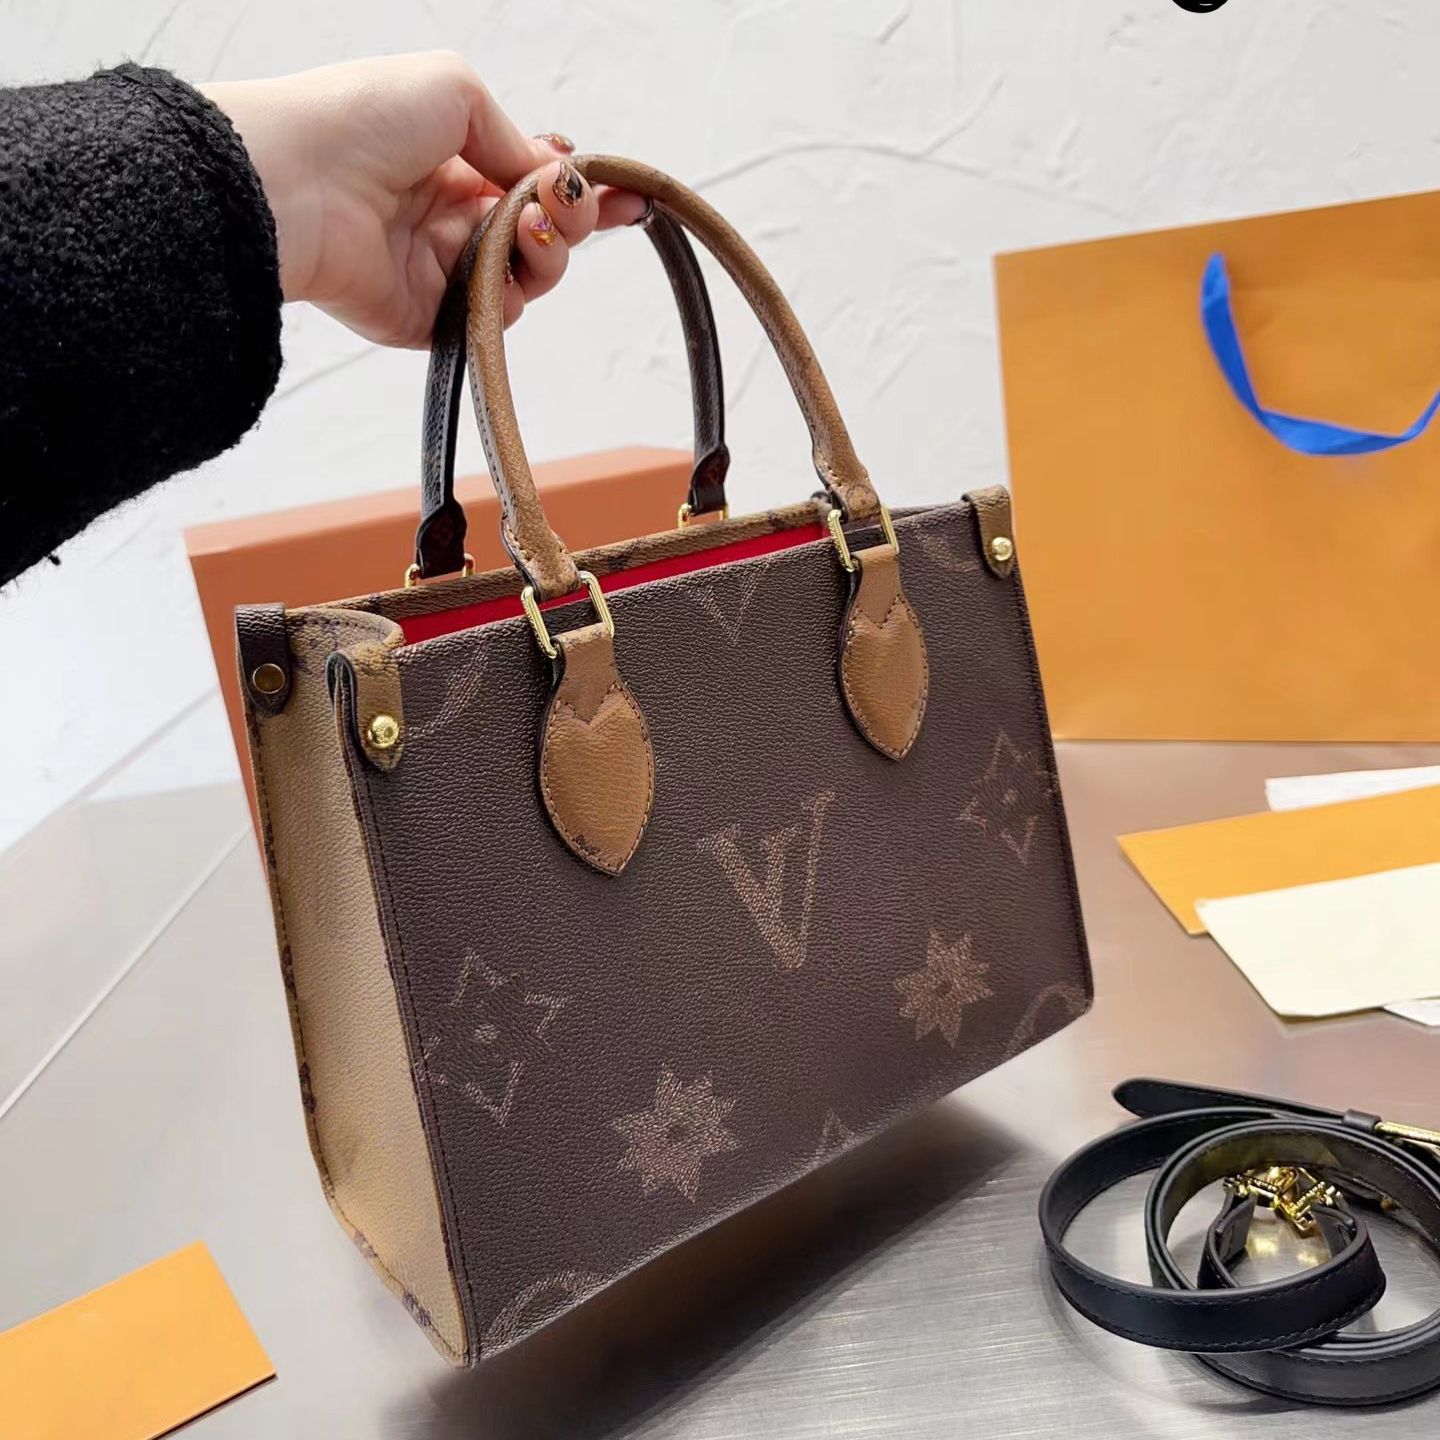 10A Luxury Designer Bags On The Go Tote Bag Shoulder Clutch Bags Crossbody  Shopping Louse Viutn Handbags Purses Letters Flowers Floral Handle Wallet  Backpack Dhgate From Letter_bags, $46.64